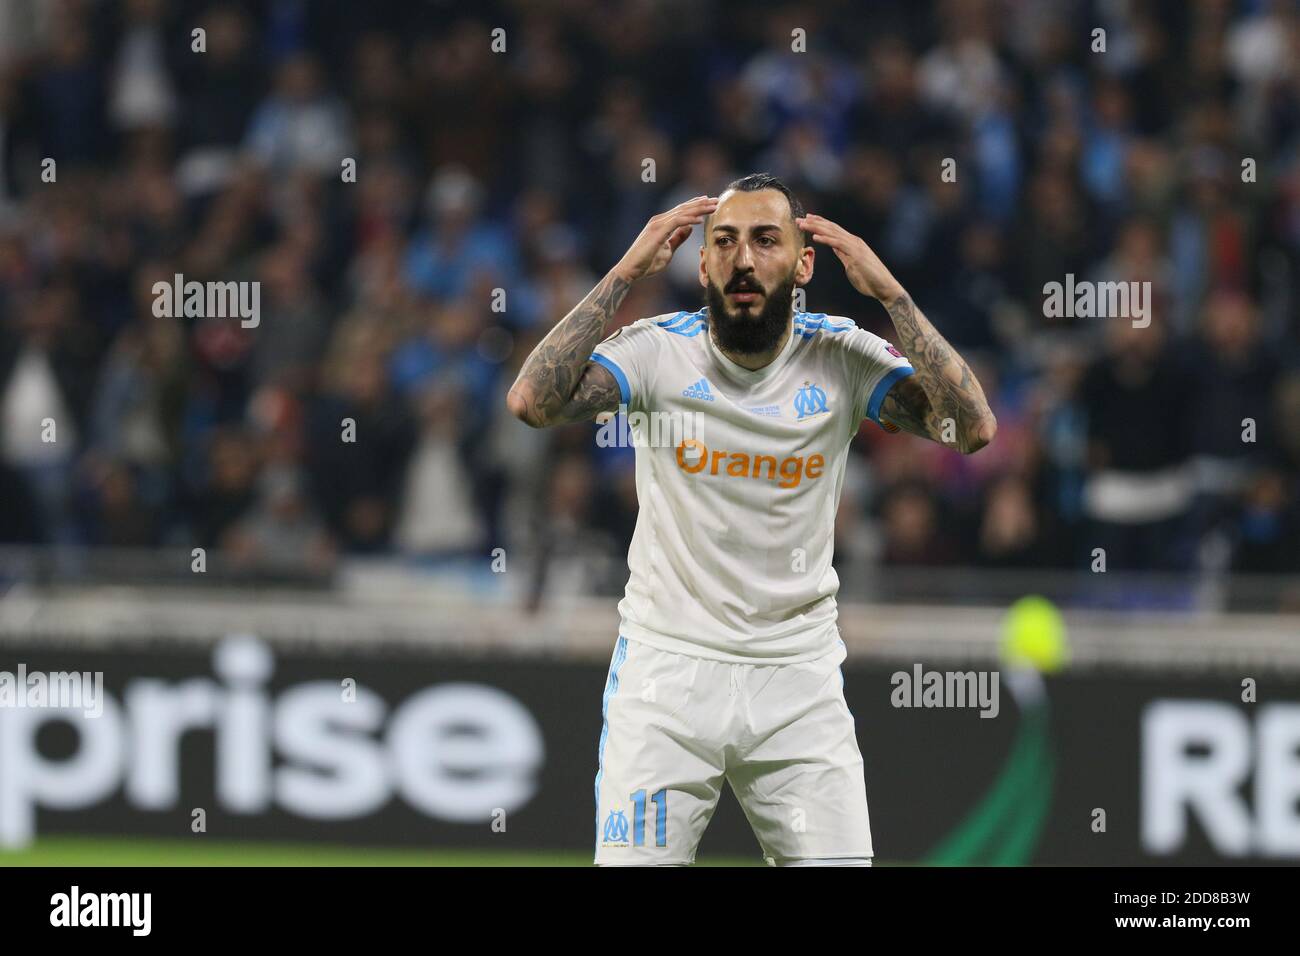 Marseille's Kostas Mitroglou during the Final of UEFA Europa League soccer match : Olympique de Marseille Vs Atletico Madrid at Lyon Stadium in Lyon France on May 16th, 2018. Photo by Guillaume Chagnard/ABACAPRESS.COM Stock Photo